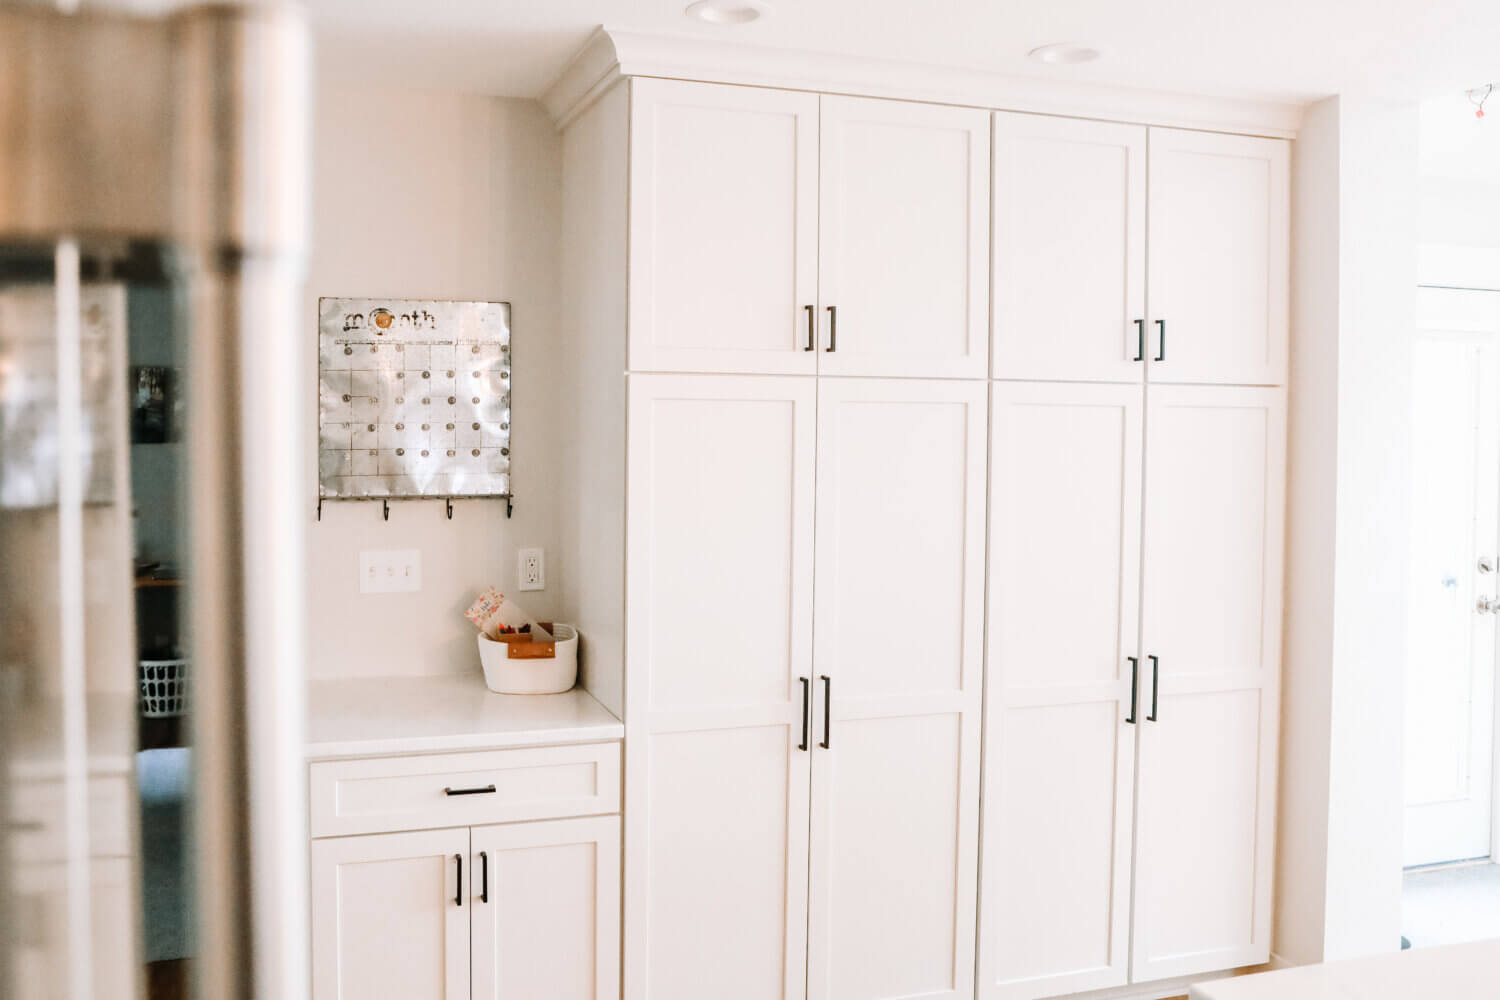 A wall of white painted cabinets and a drop-zone space with an organizational planner.